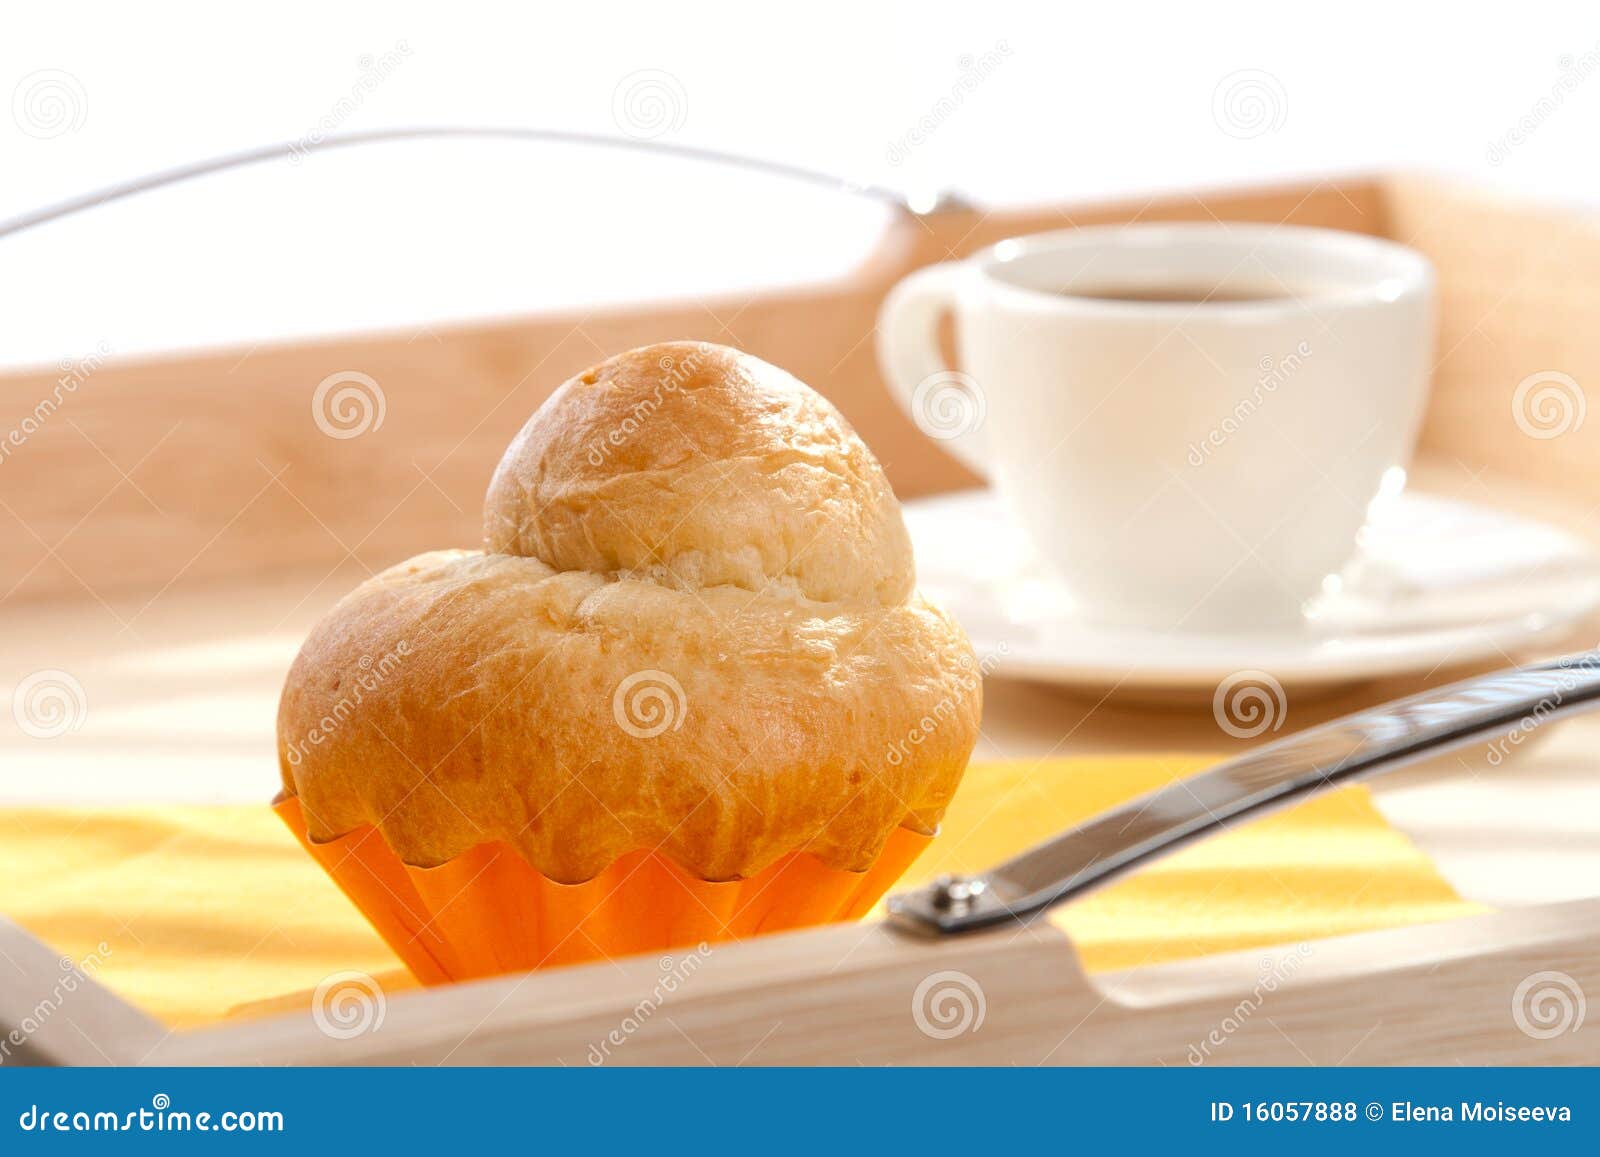 french brioche and white cup of coffee